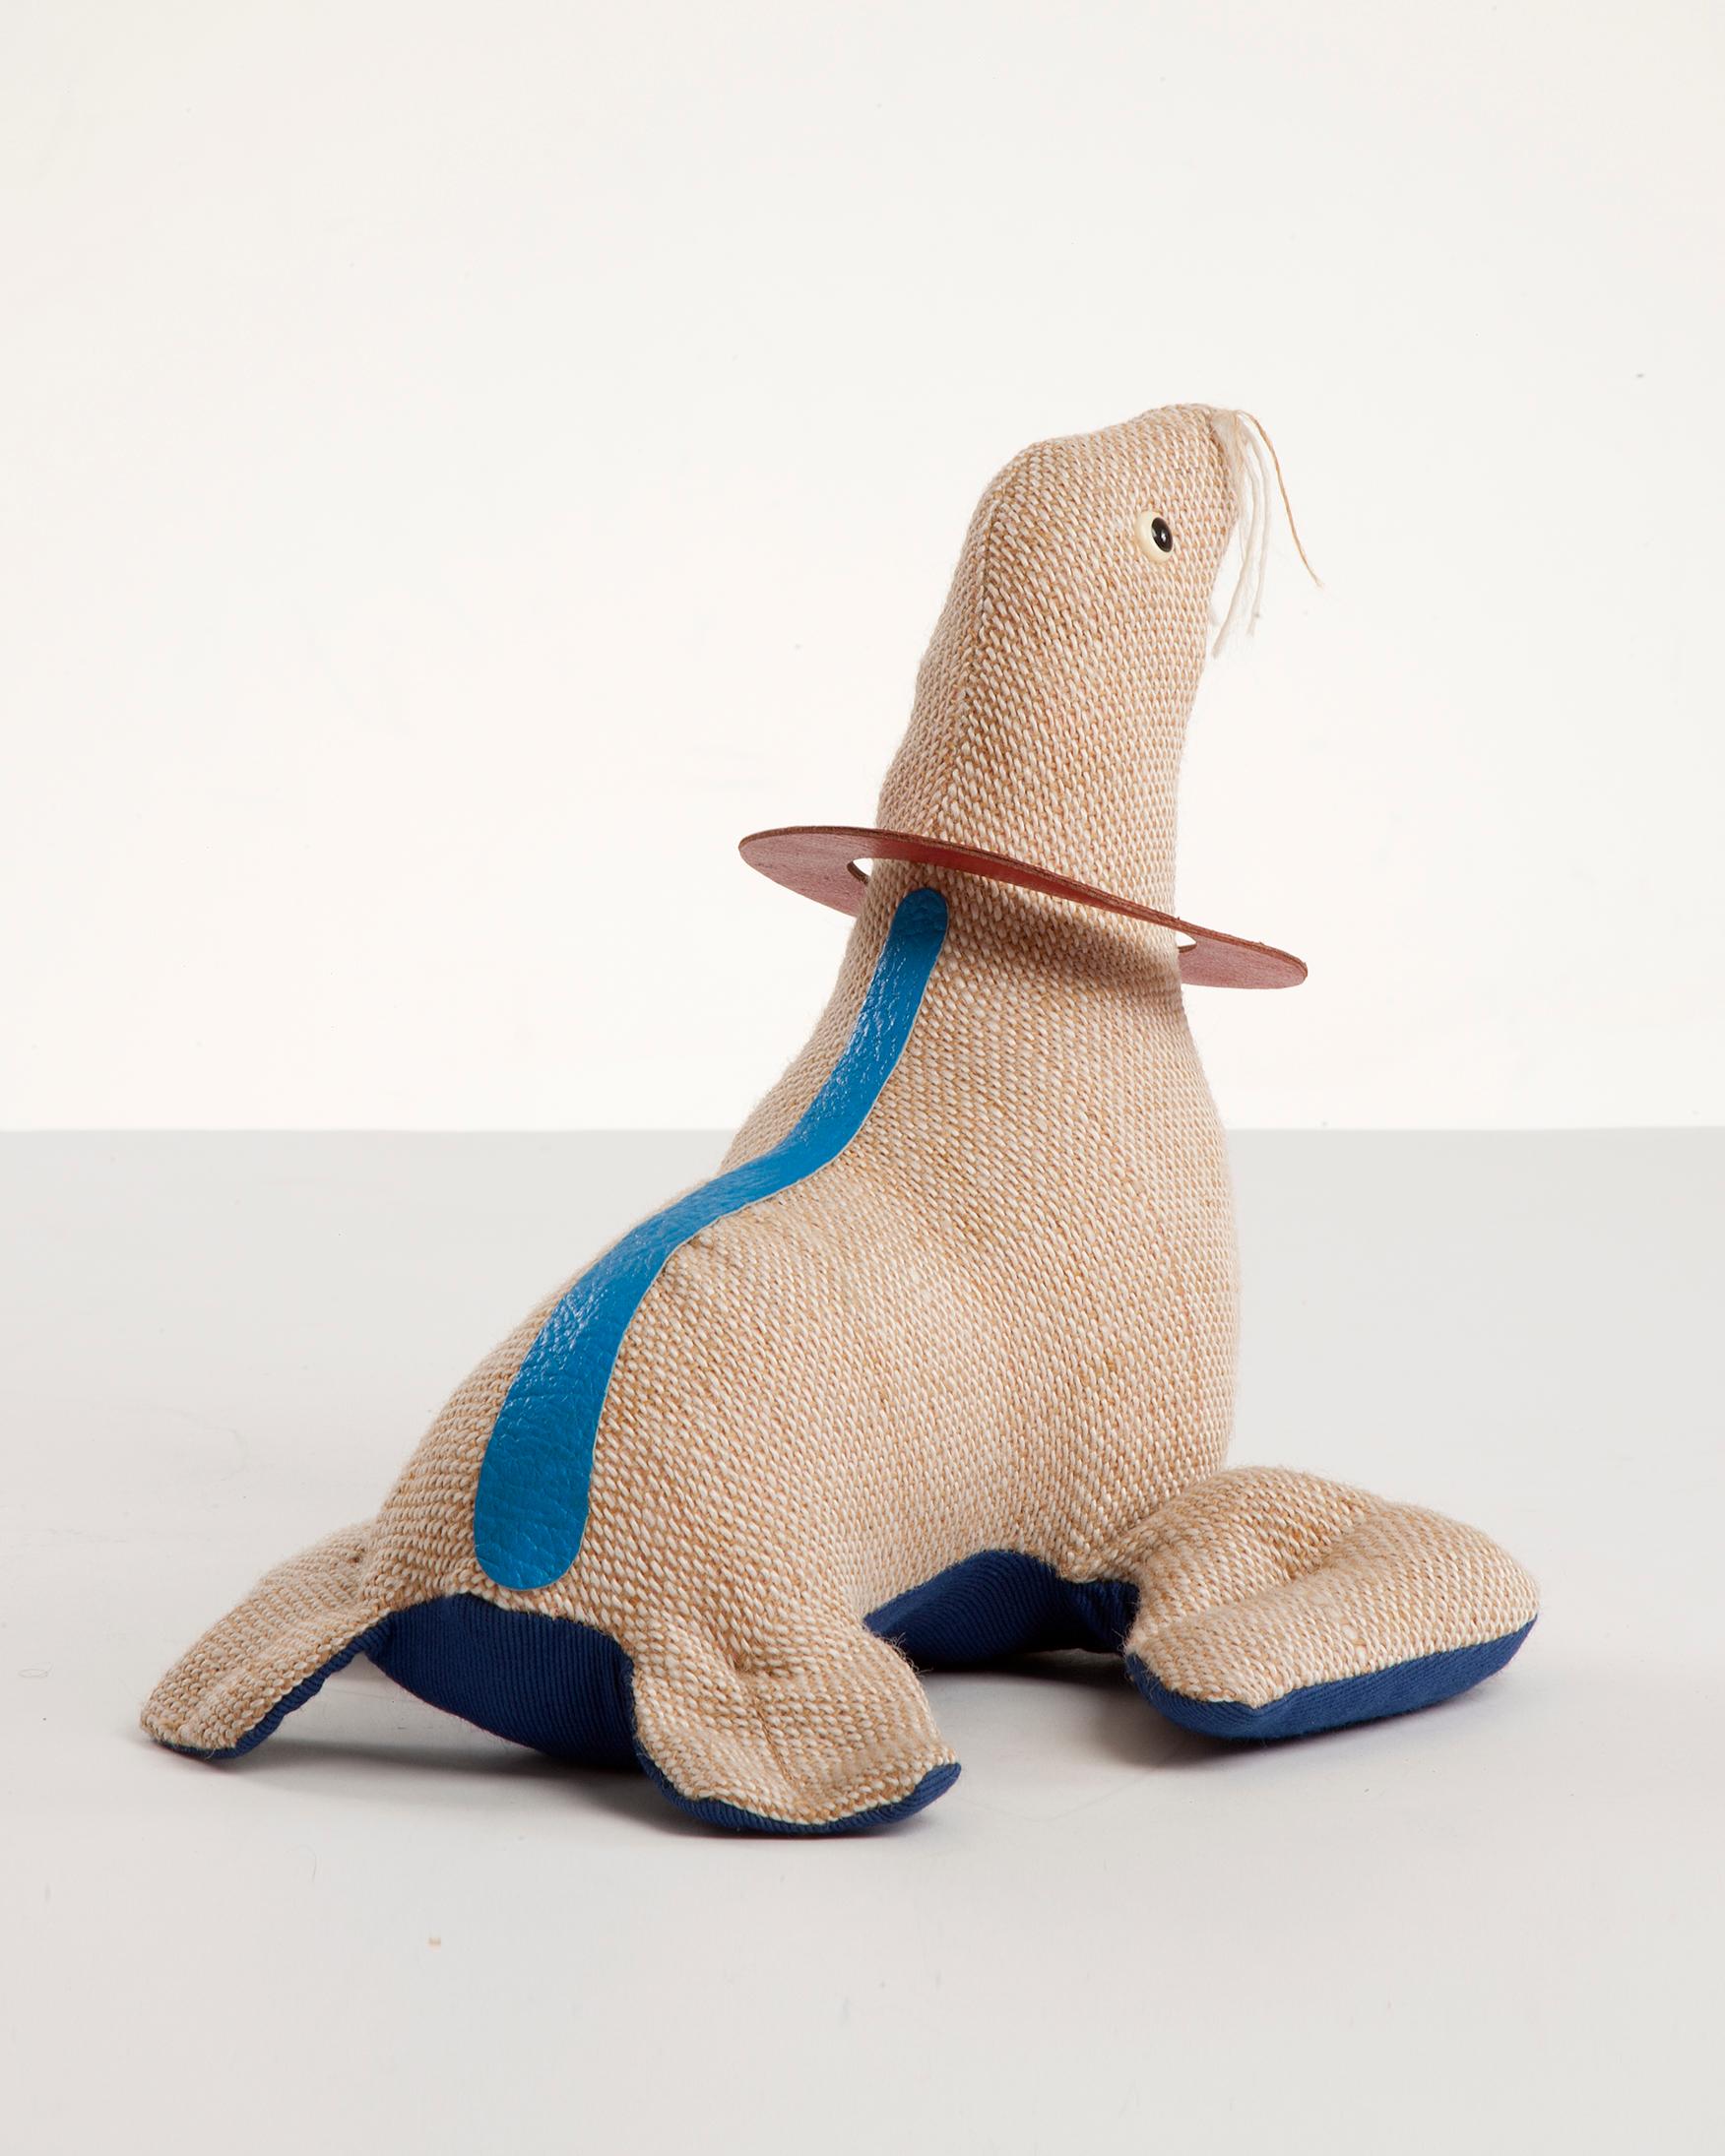 Therapeutic Toy Seal in jute with leather detailing. Designed and made by Renate Müller for H. Josef Leven, Sonneberg, Germany, produced between 1965-1971.
 